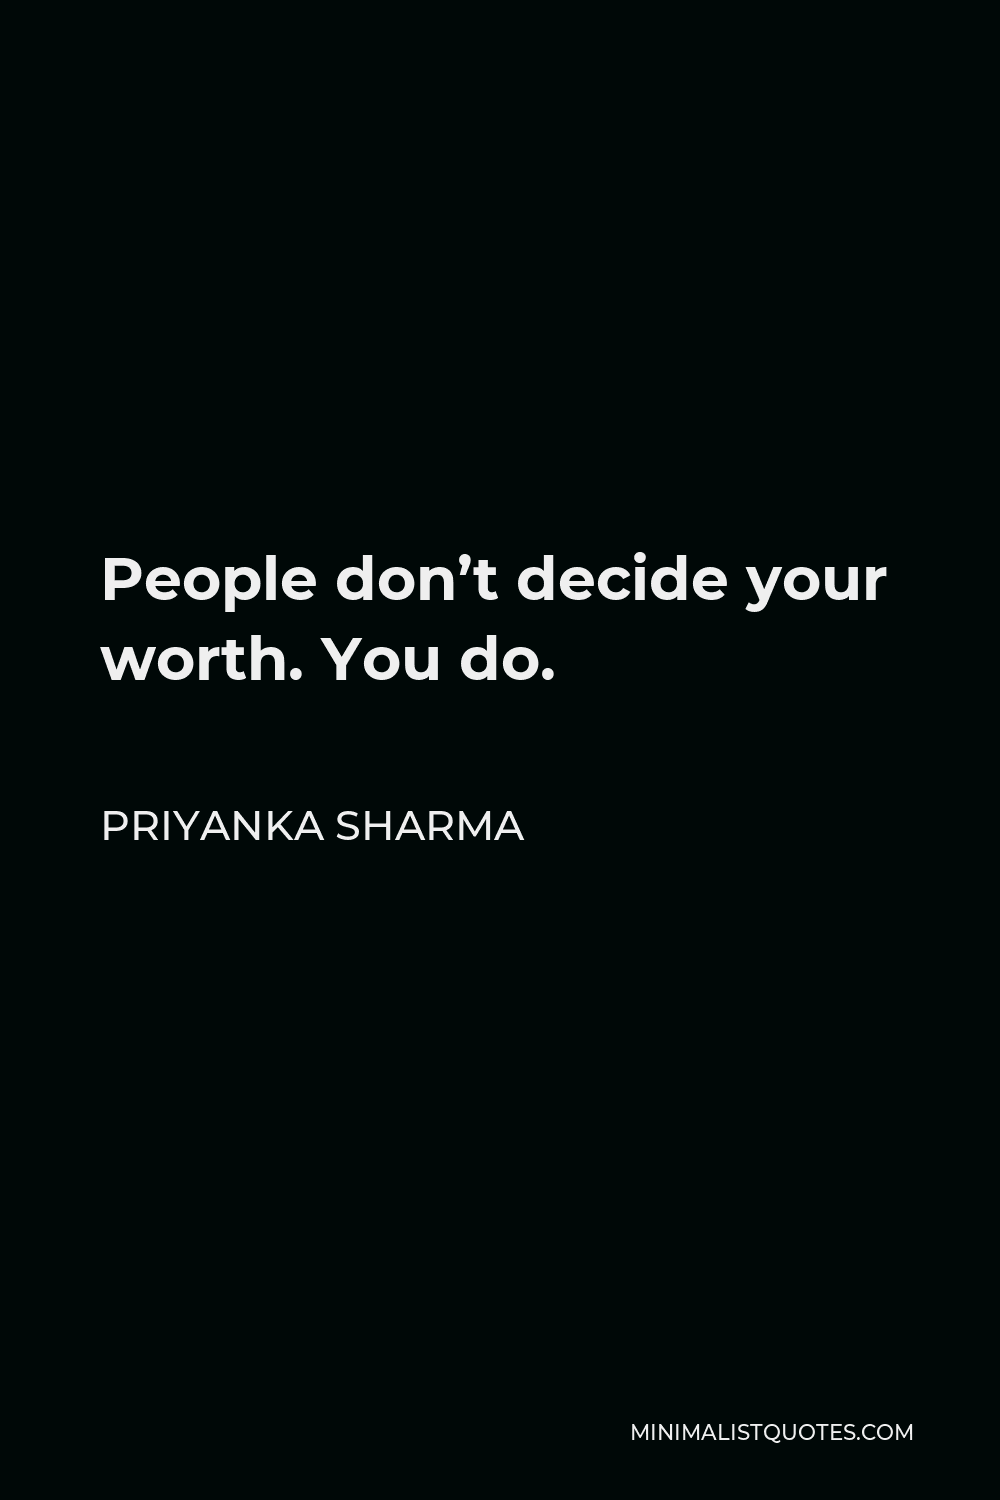 Priyanka Sharma Quote - People don’t decide your worth. You do.